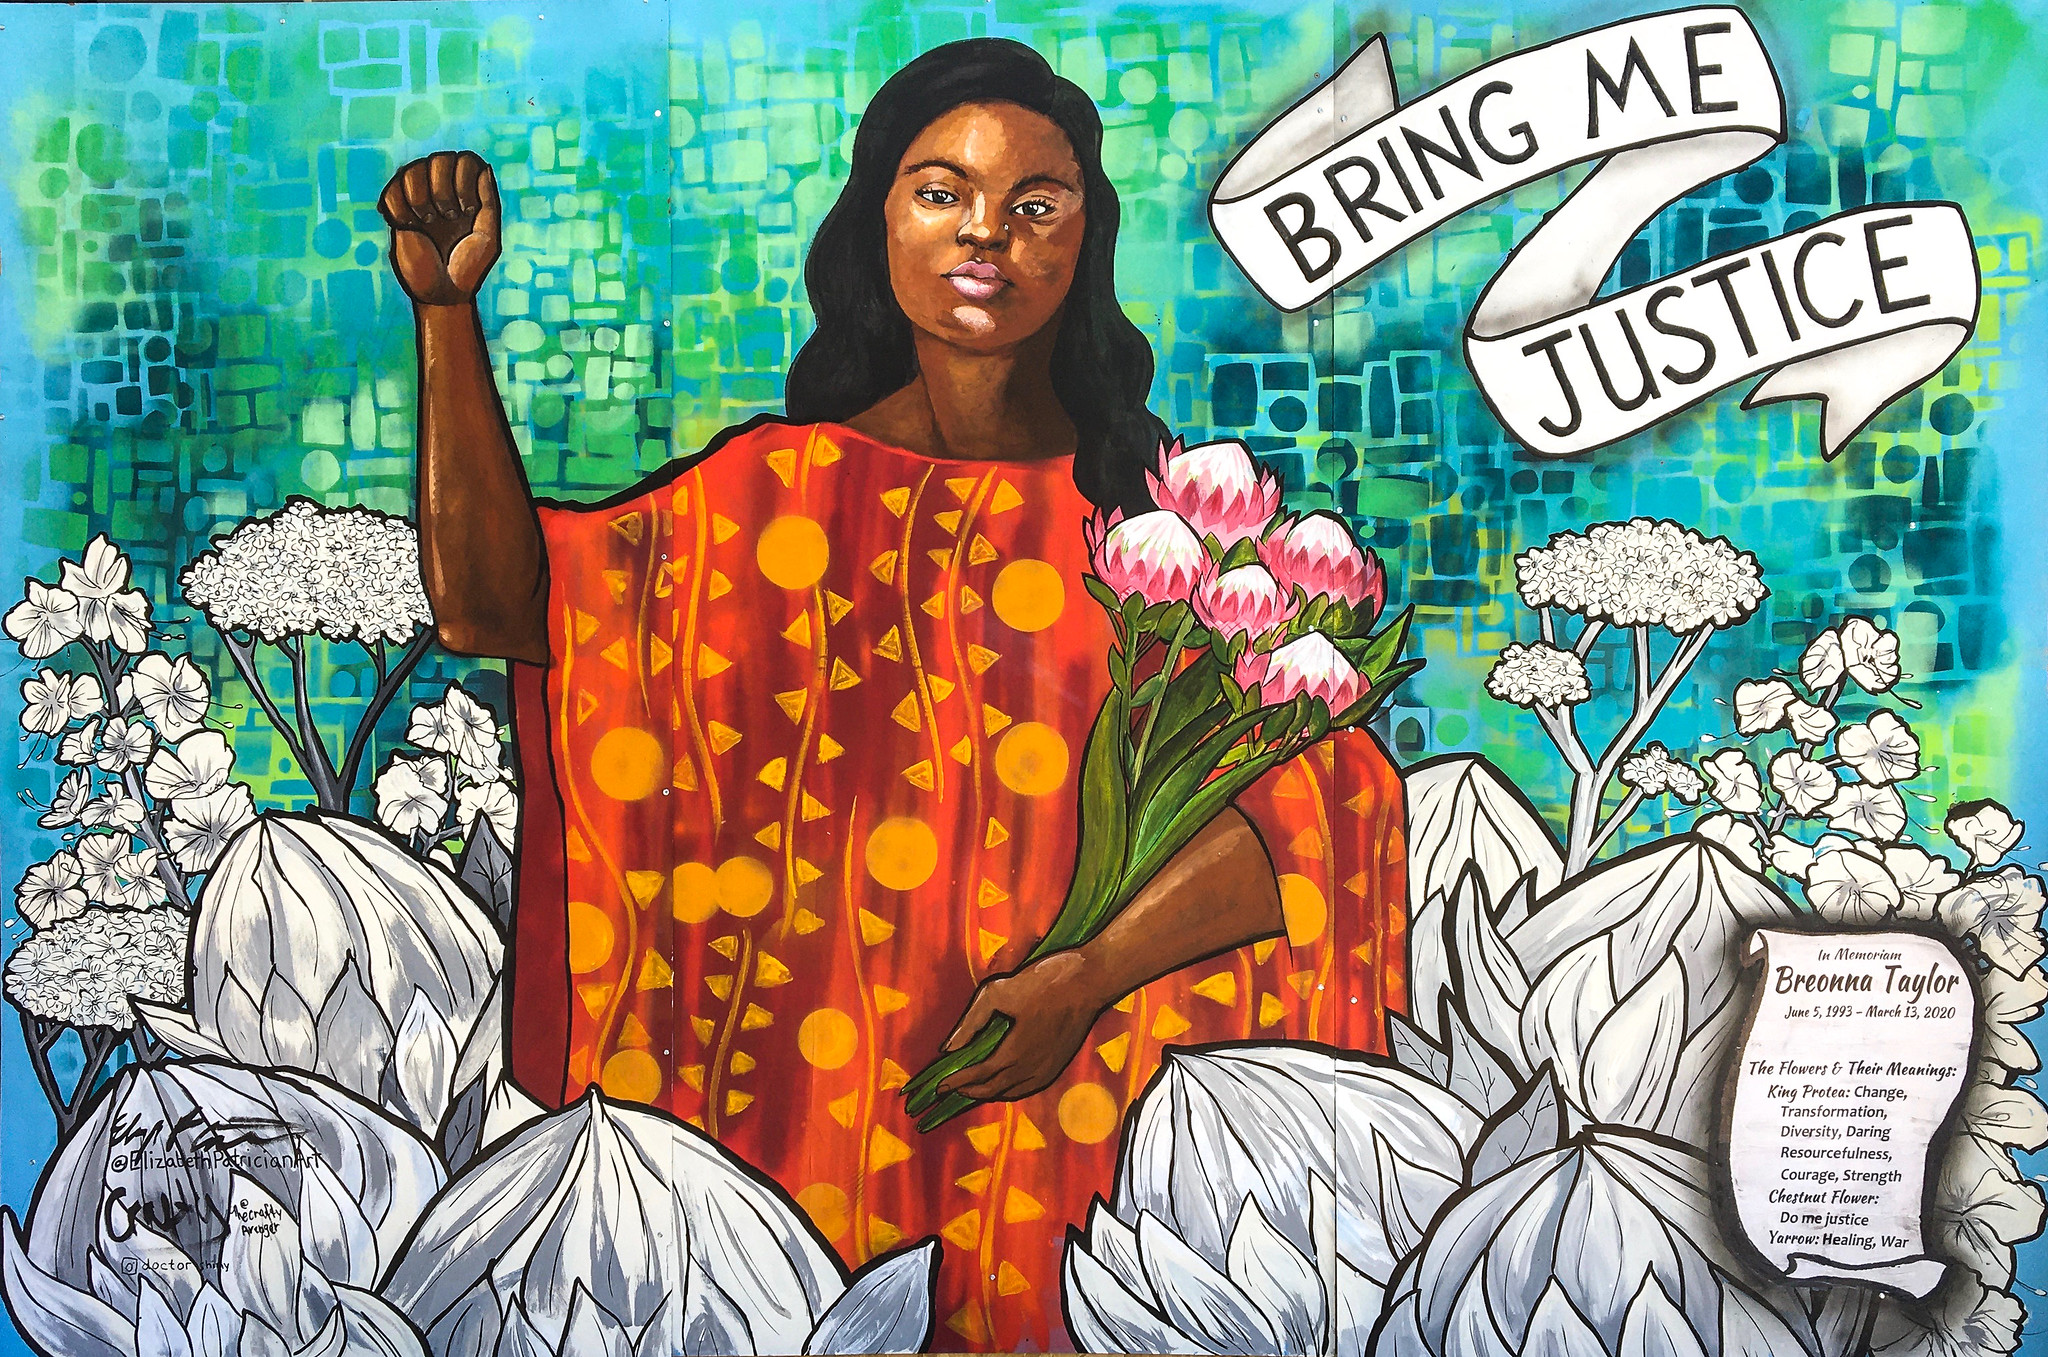 a painting of a woman, Breonna Taylor, holding flowers in her hands and surrounded by flowers